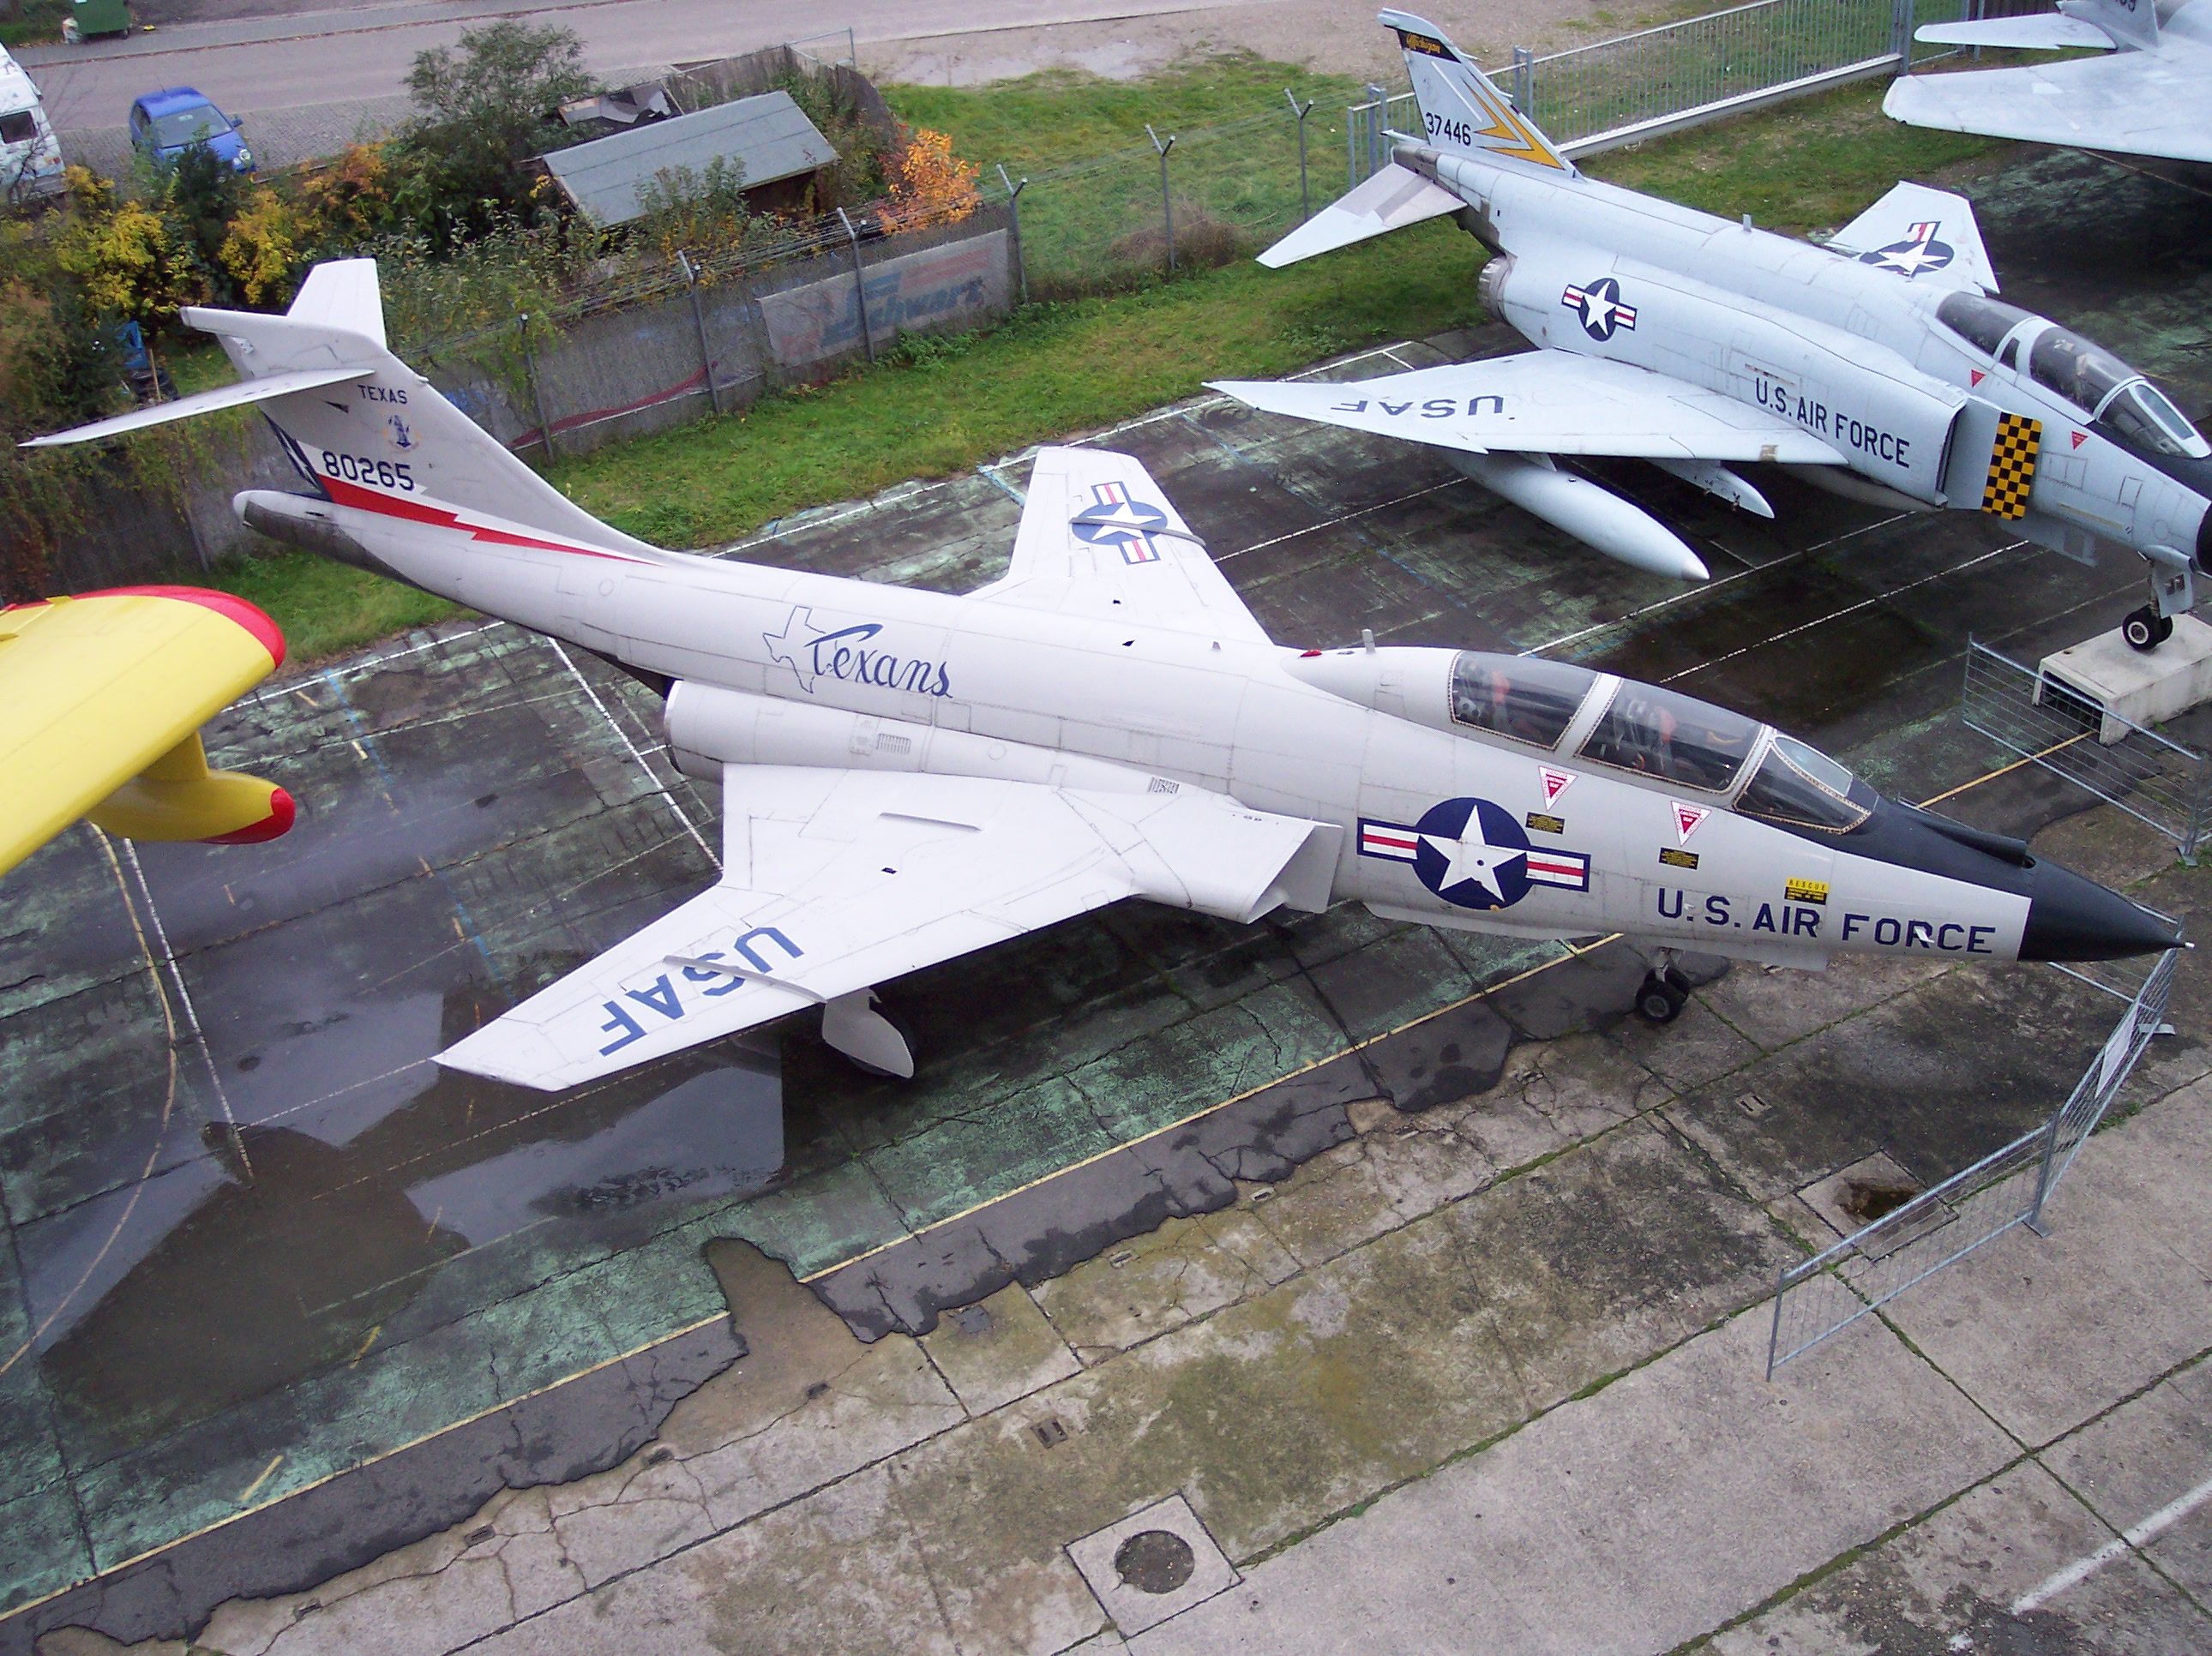 McDonnell F-101 Voodoo Pics, Military Collection